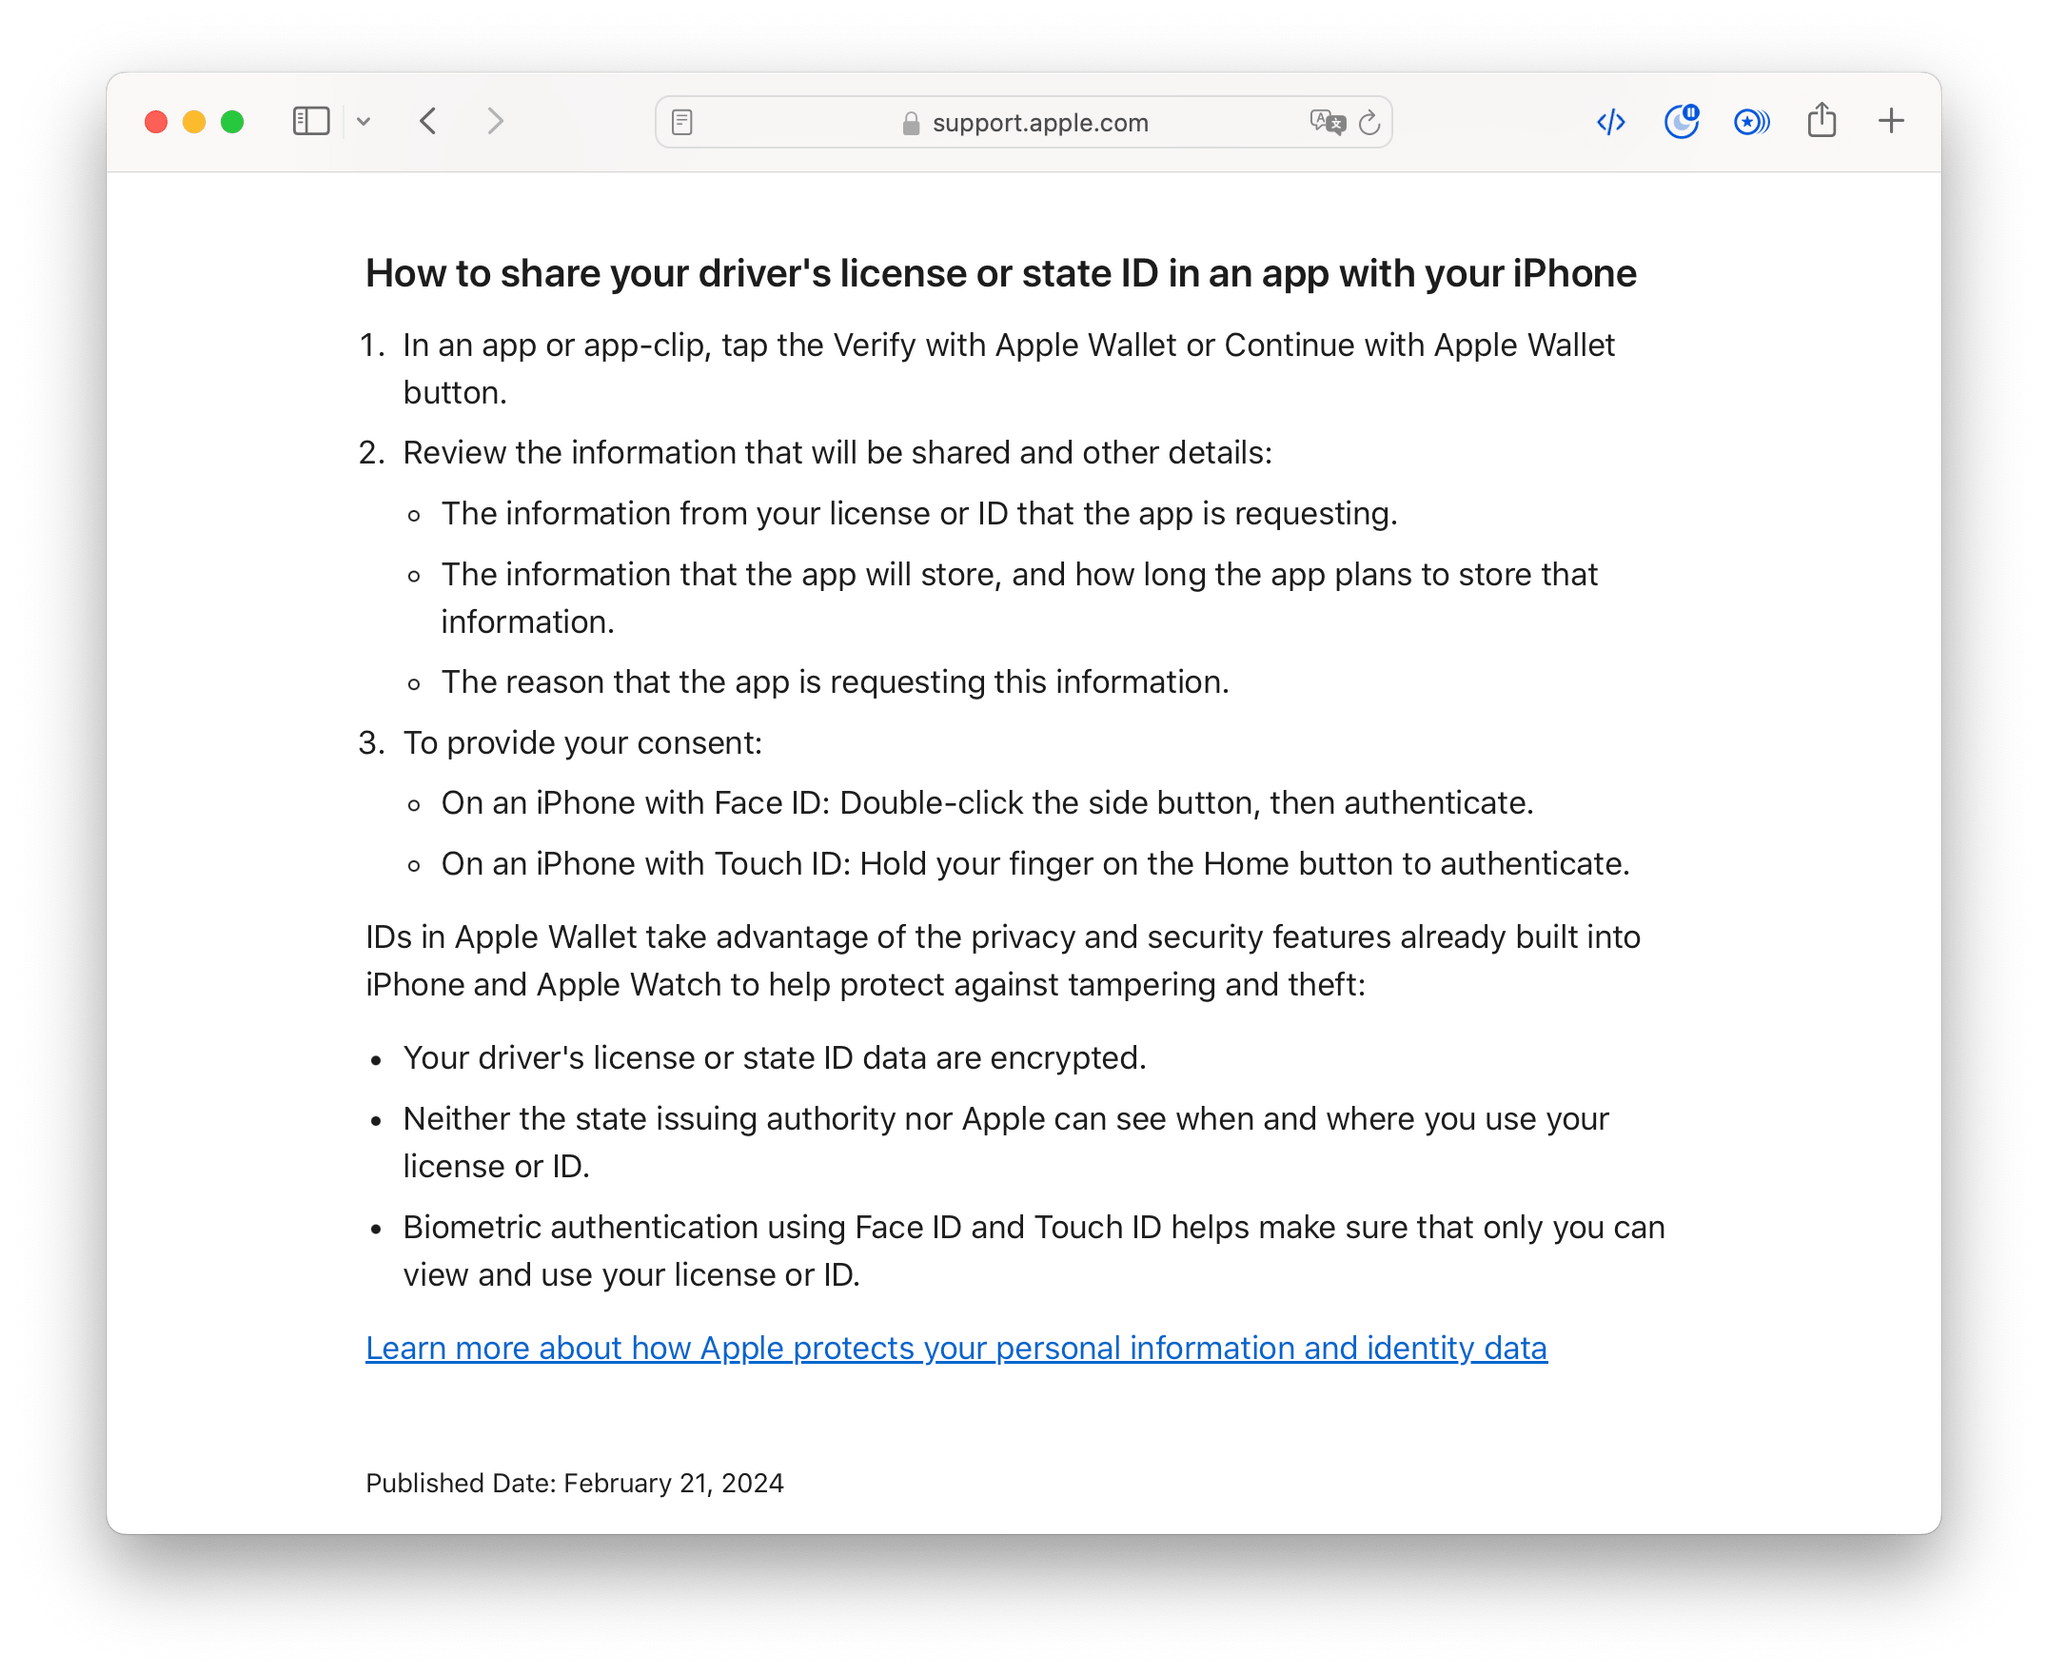 Apple Support [details](https://support.apple.com/en-us/118237) how information from IDs stored in Apple Wallet can be shared to third-party apps.